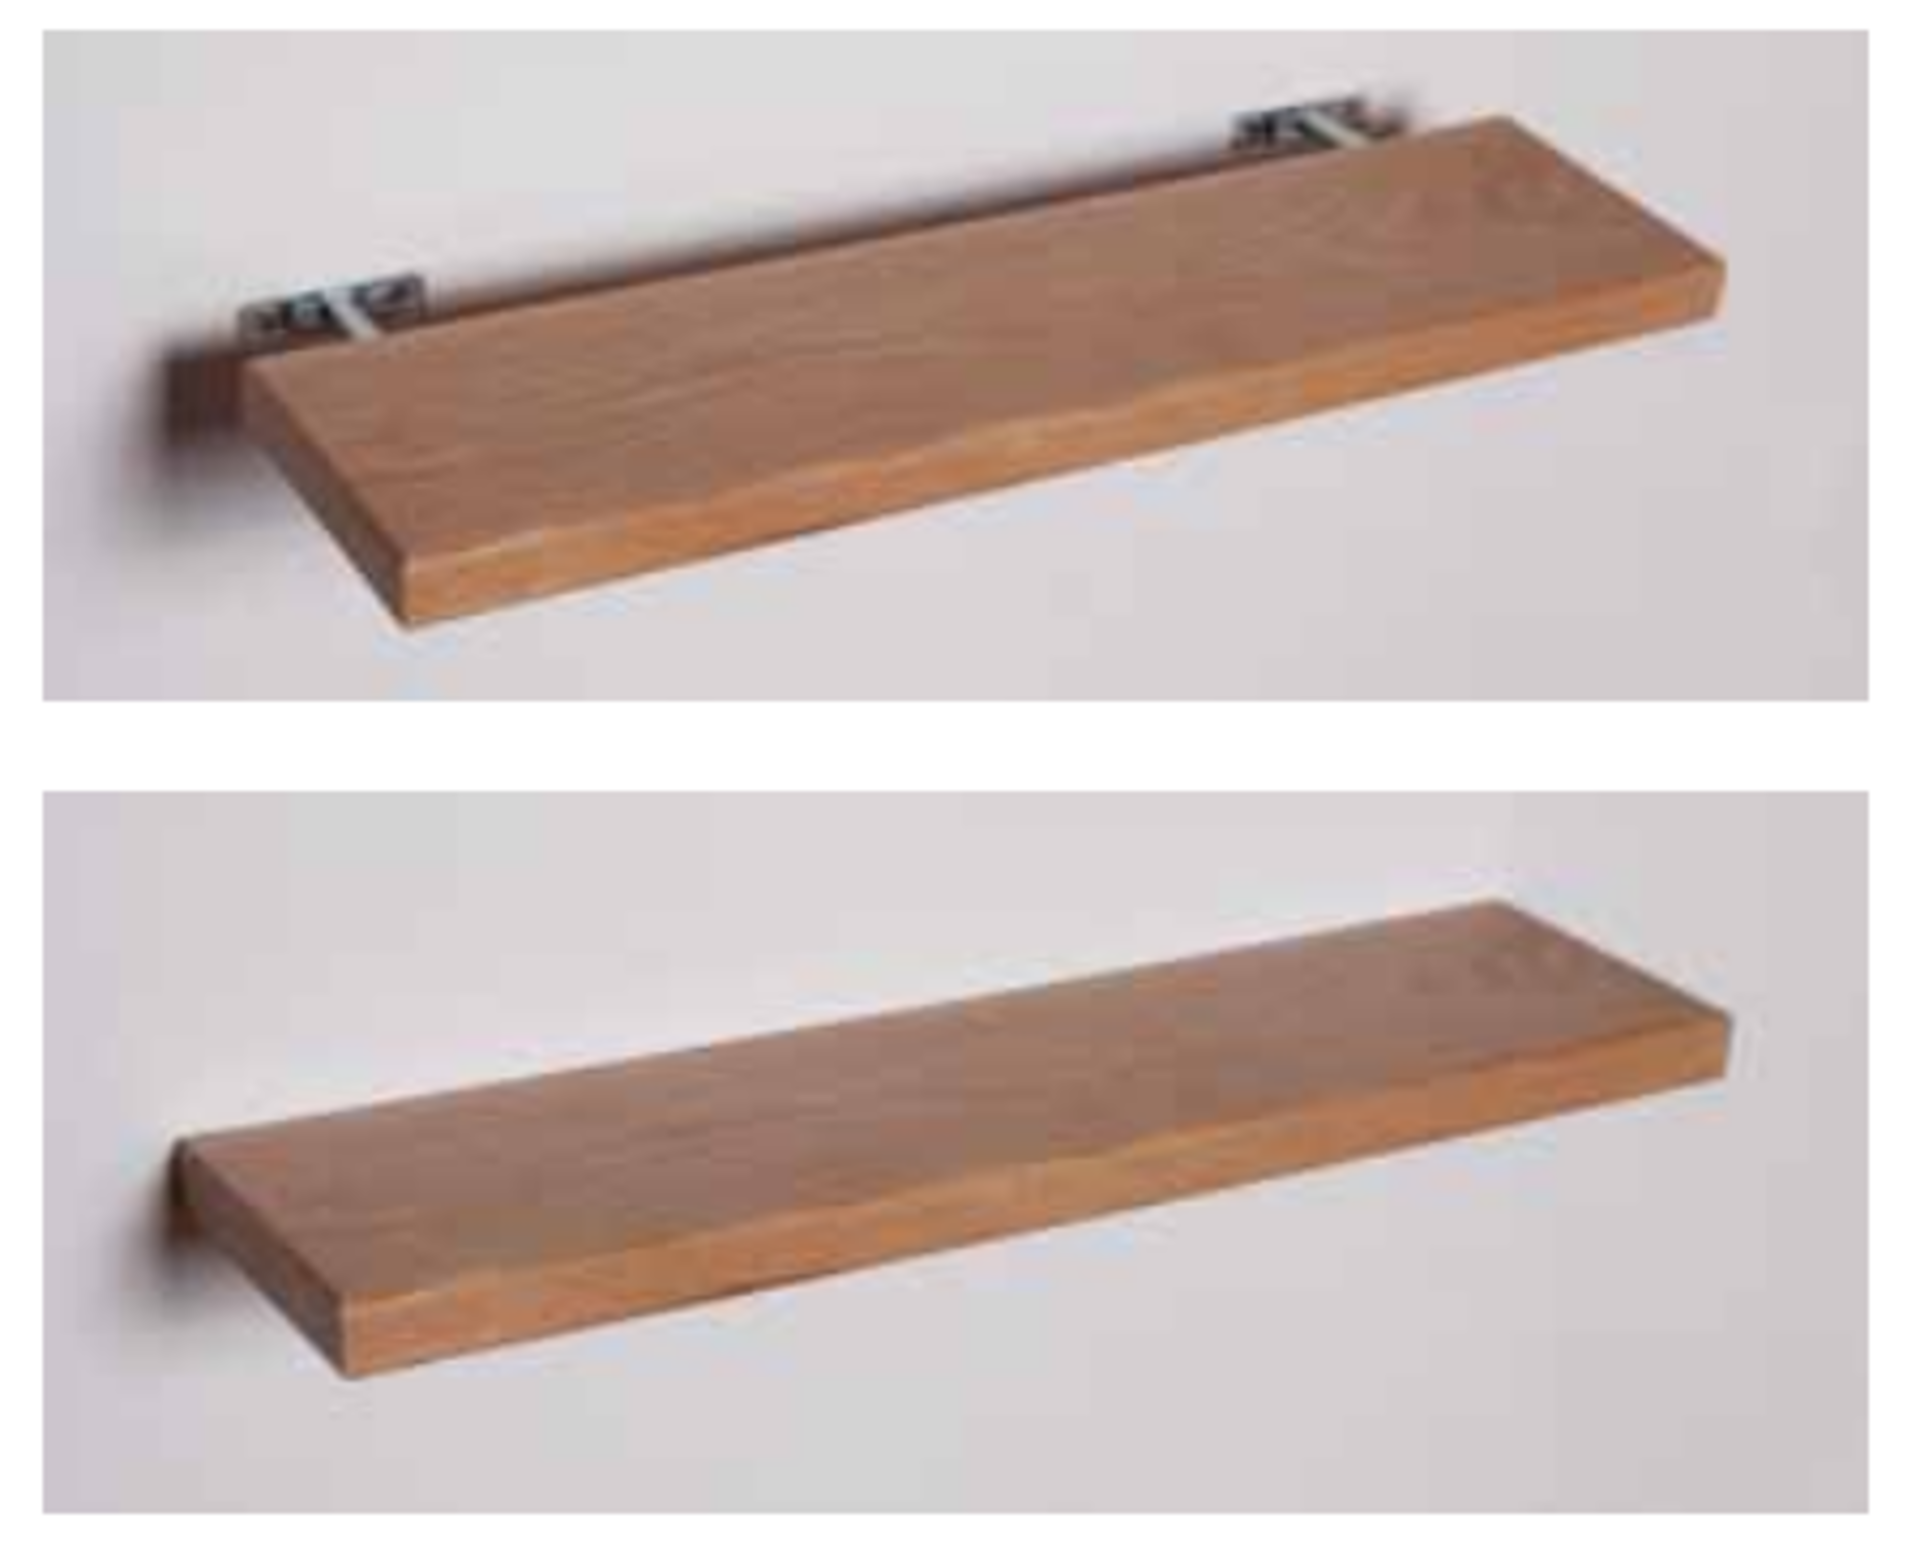 1 x Stonearth Bathroom Storage Shelf With Concealed Brackets - American Solid Walnut - Size: 1200mm - Image 2 of 16